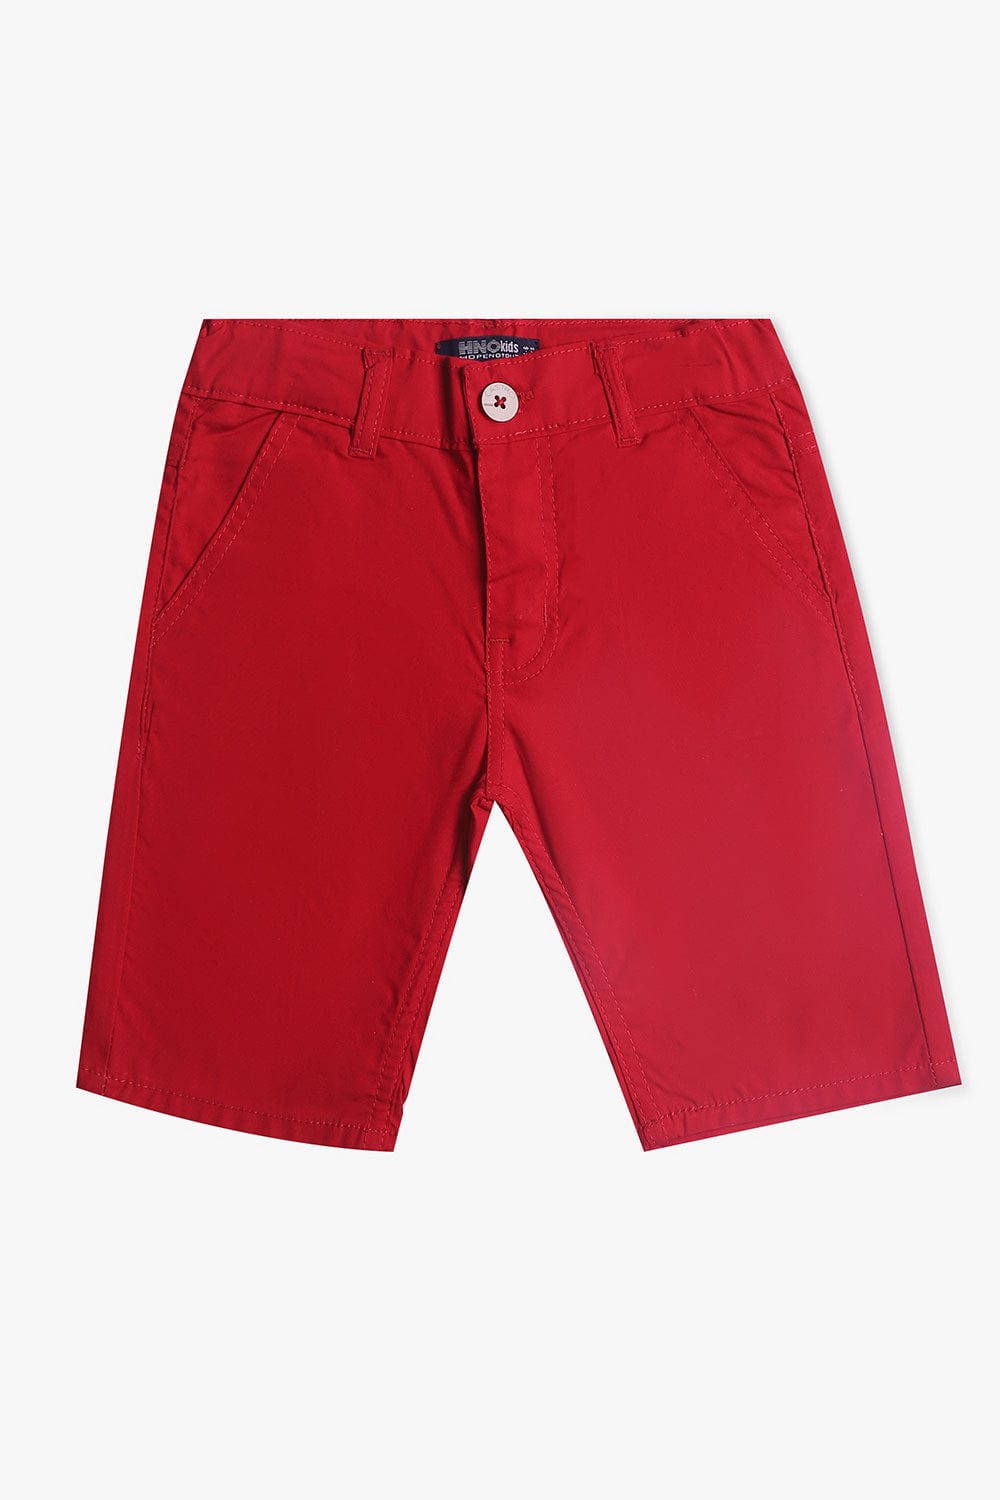 Hope Not Out by Shahid Afridi Boys Non Denim Shorts Casual Shorts